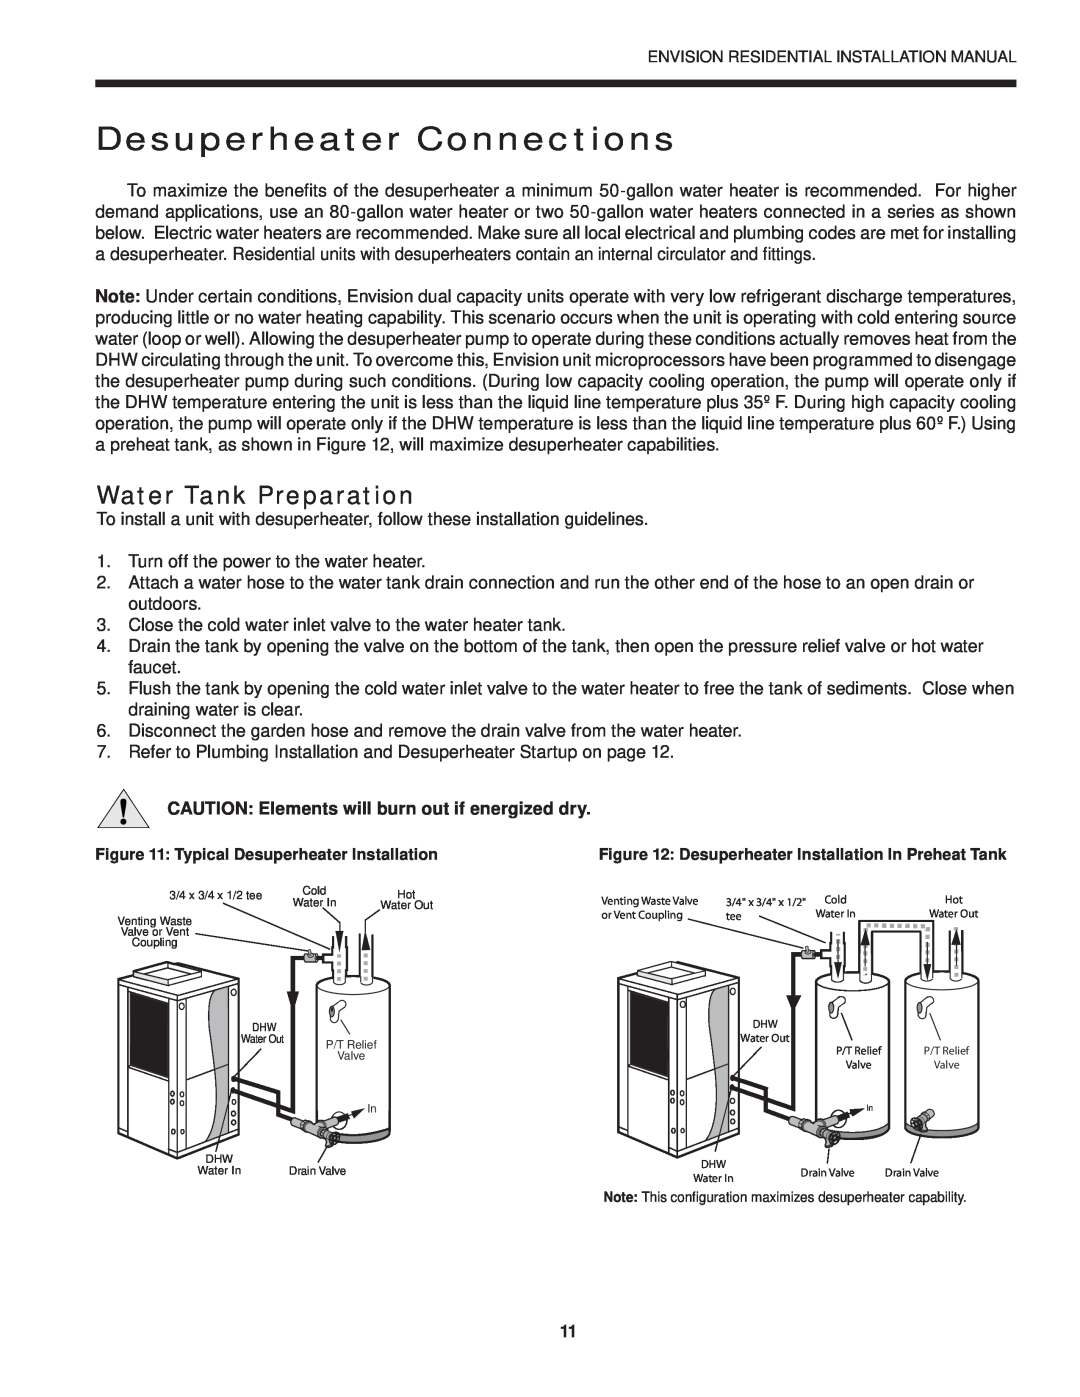 Envision Peripherals R-410A installation manual Desuperheater Connections, Water Tank Preparation 